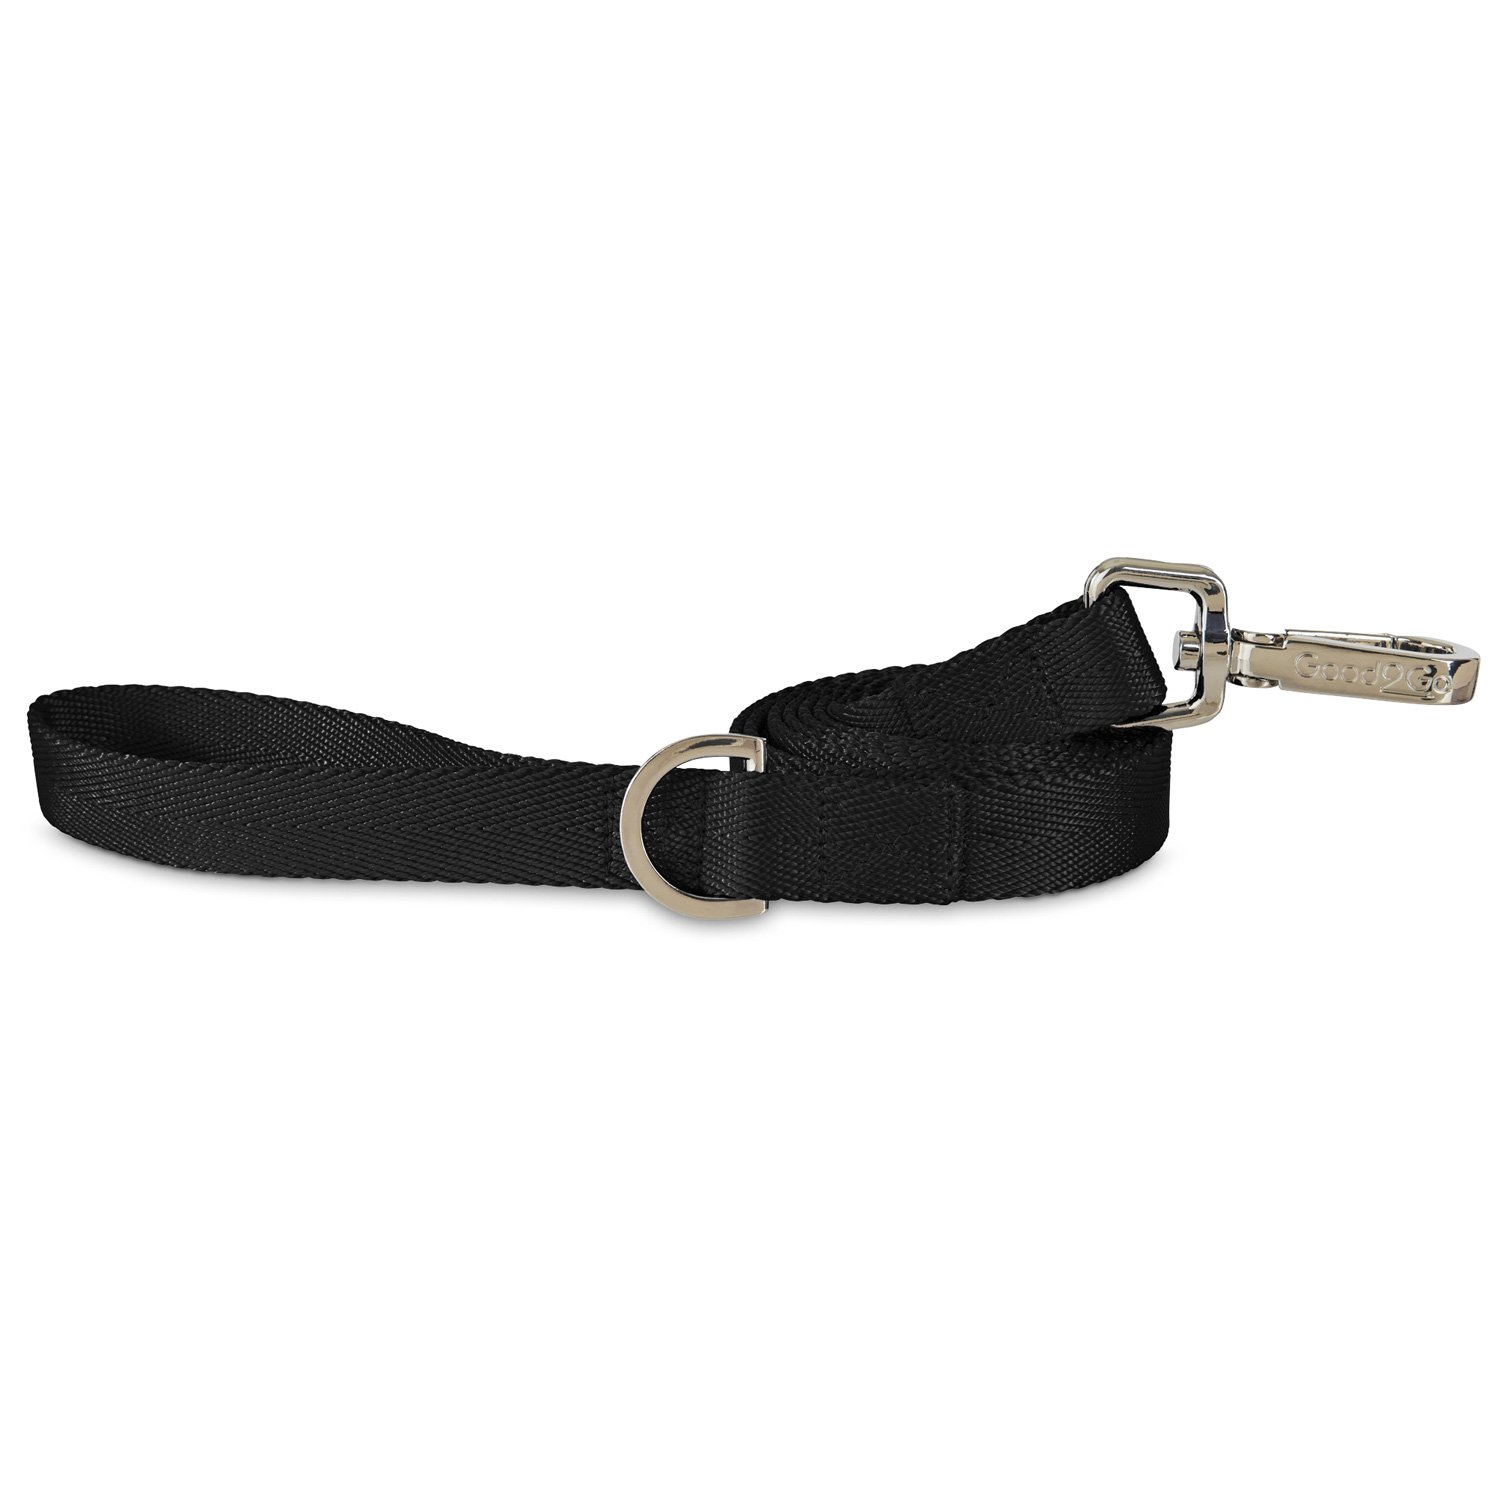 Dog Leashes & Leads: Best Dog Leashes for Pets | Petco